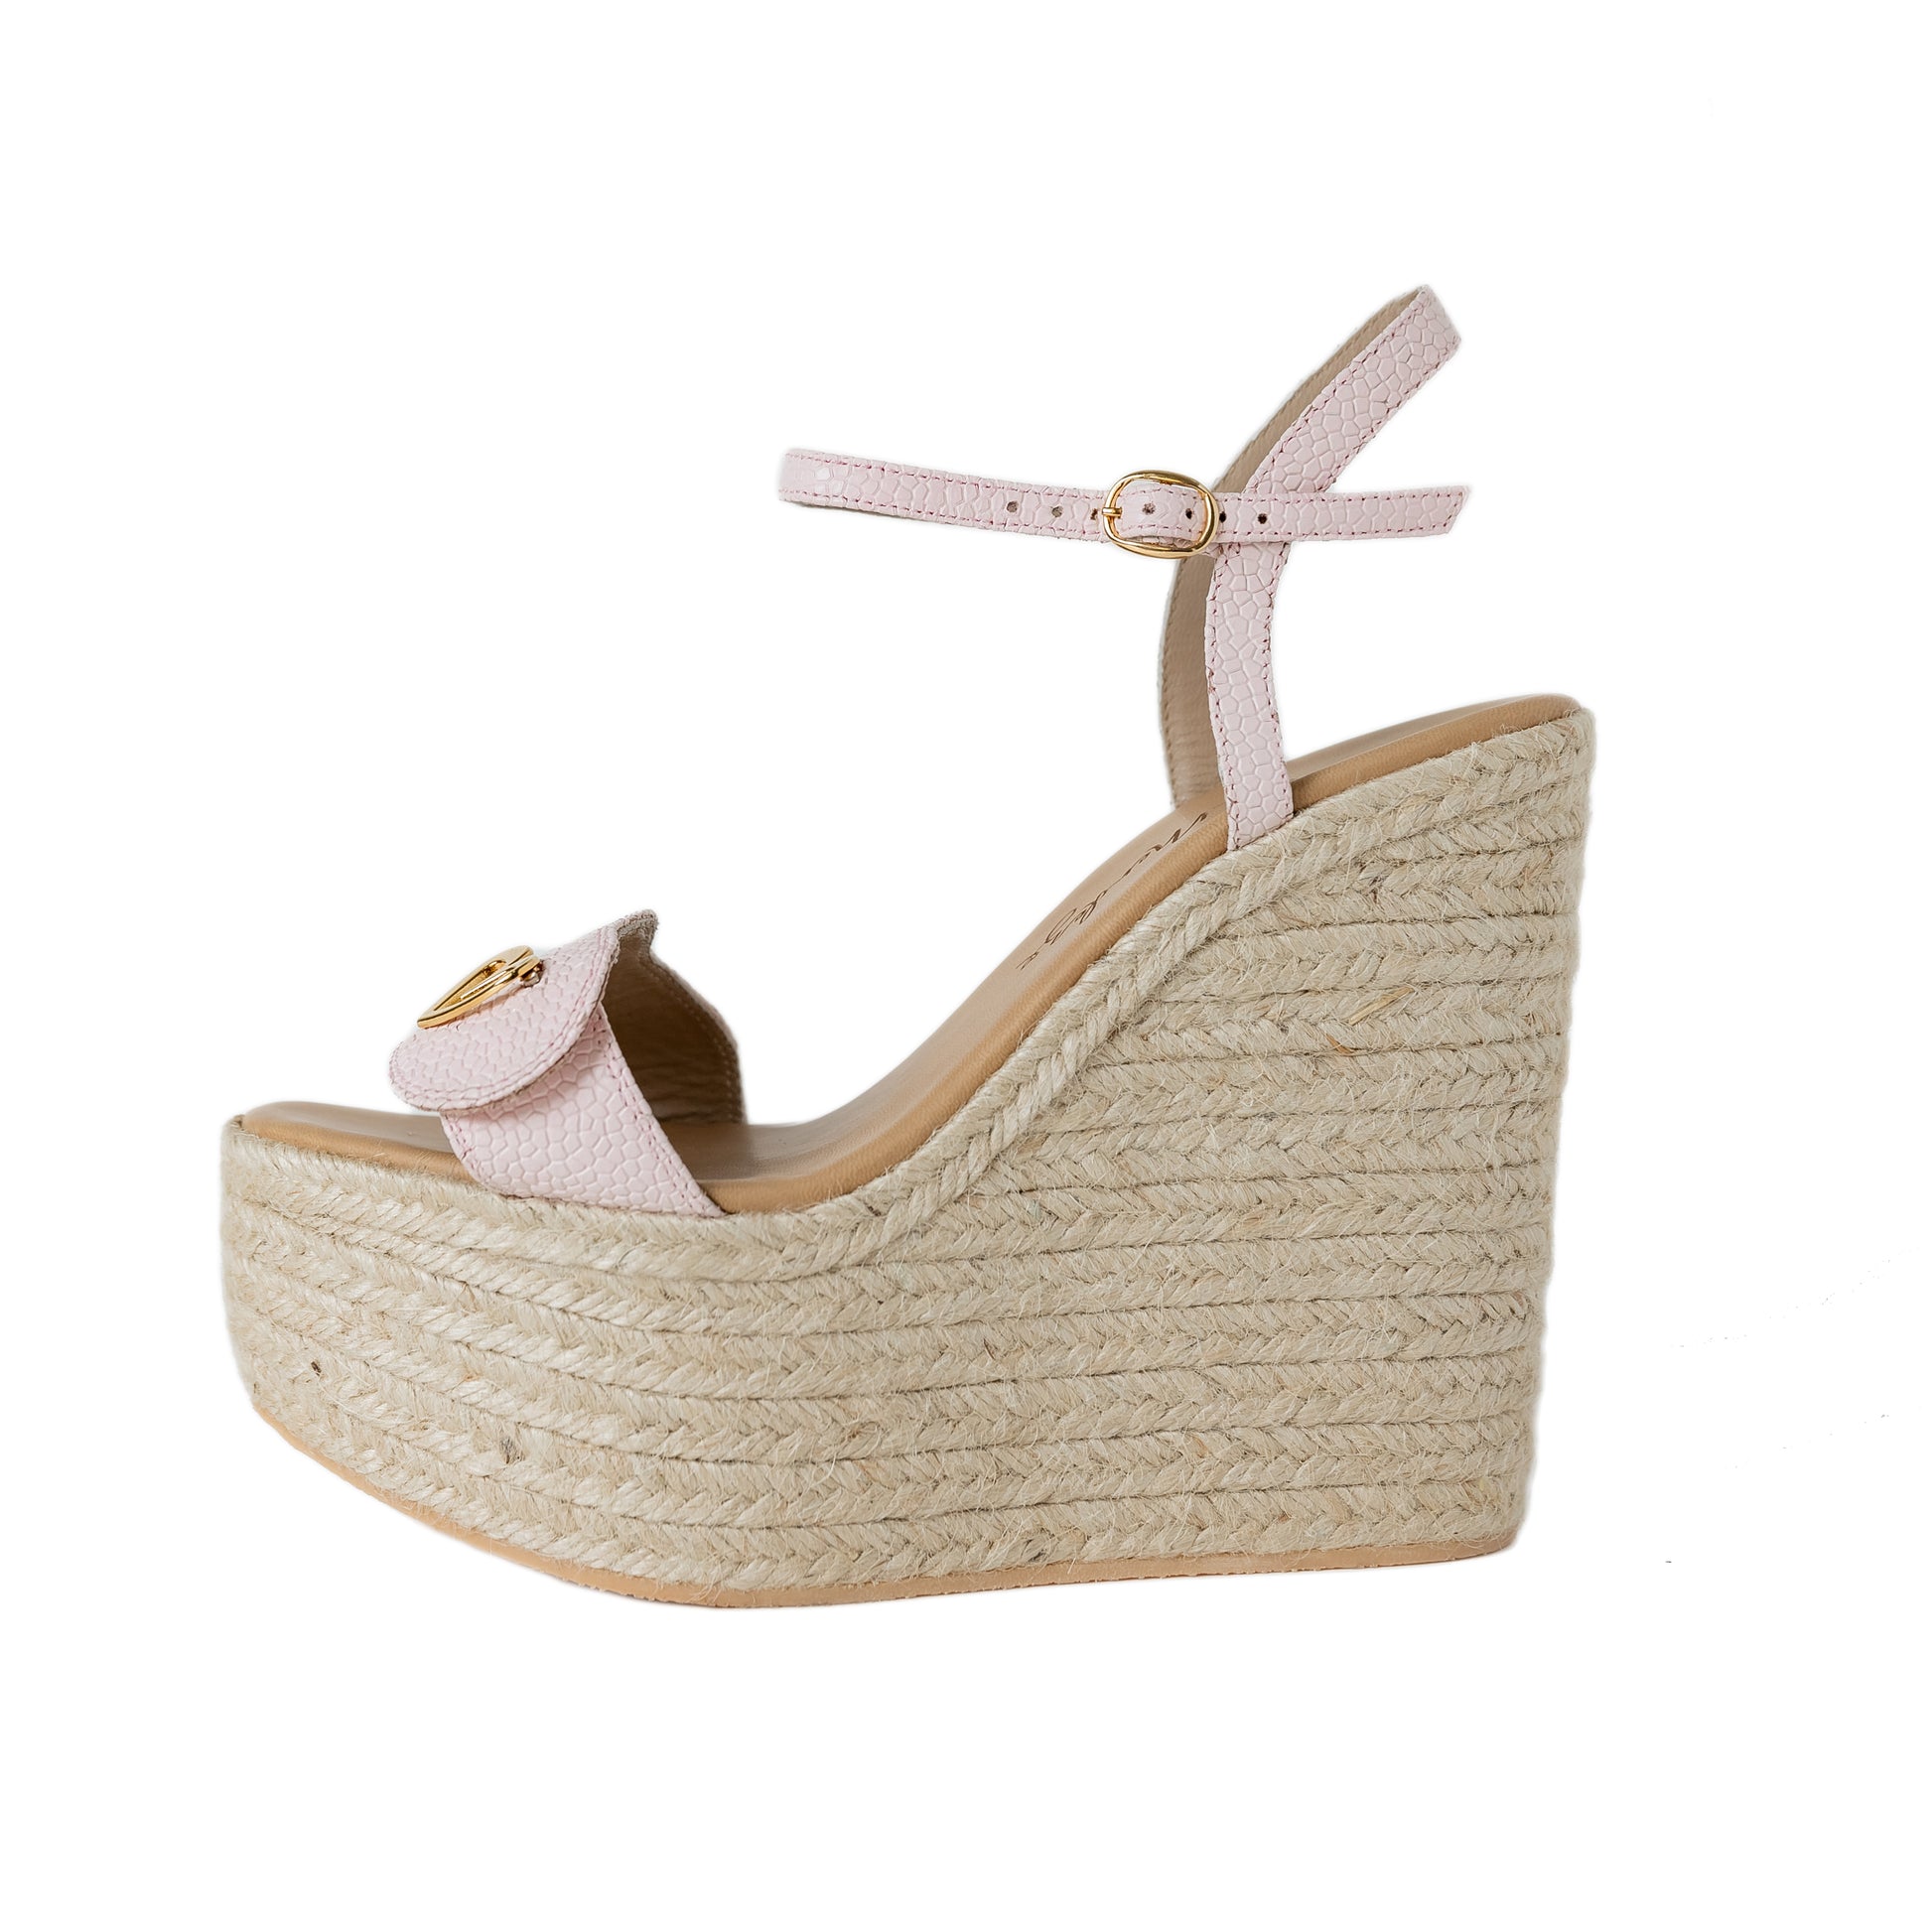 Amy Espadrilles by Nataly Mendez Genuine leather upper material Genuine leather insole lining Flexible rubber sole Handmade 5.5 inch high heel 2.5 inch platform